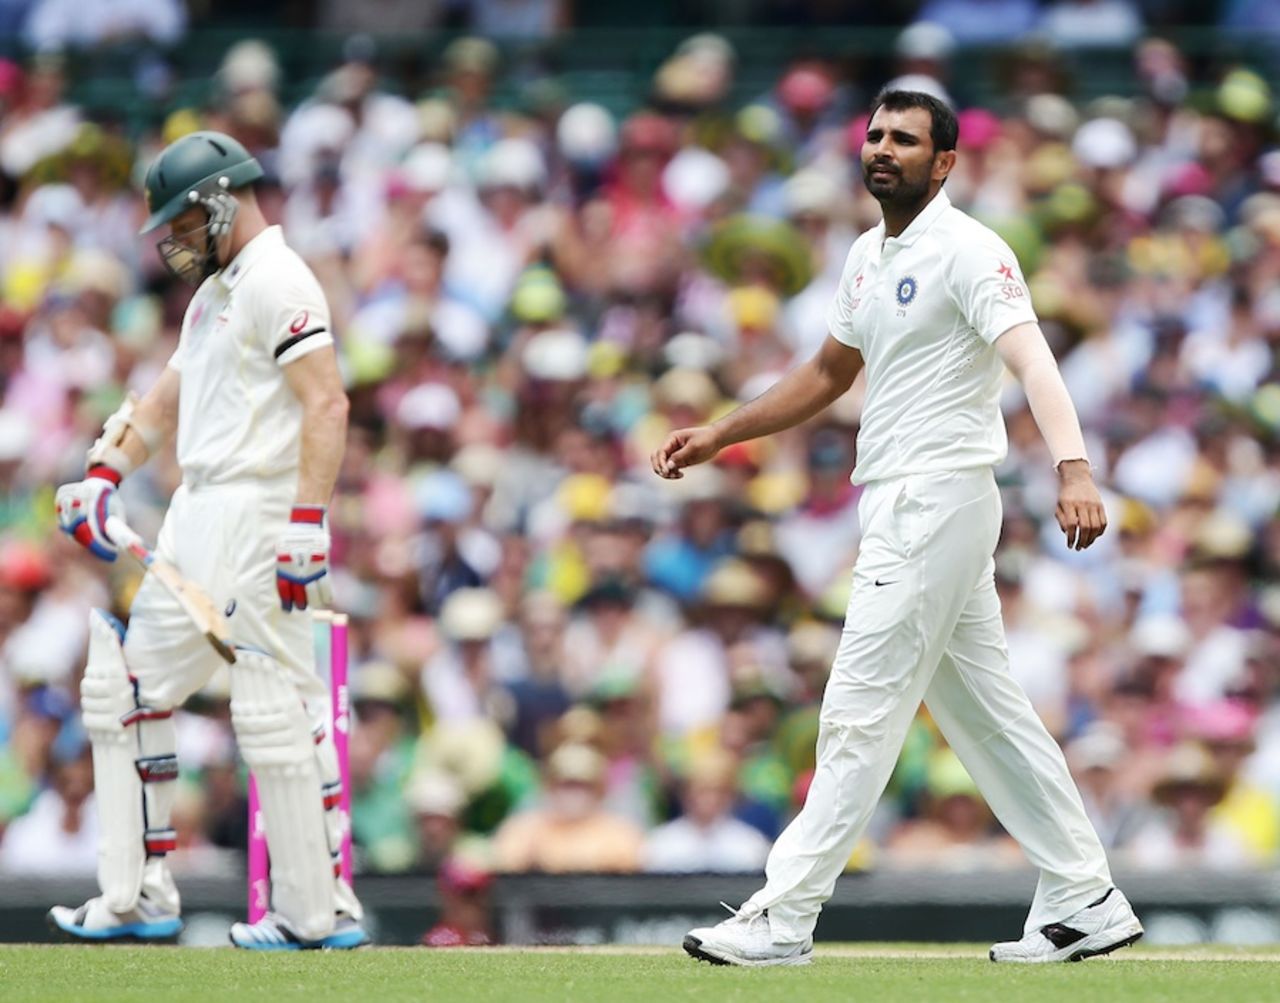 Chris Rogers was dropped off Mohammed Shami's bowling on 19, Australia v India, 4th Test, Sydney, 1st day, January 6, 2015